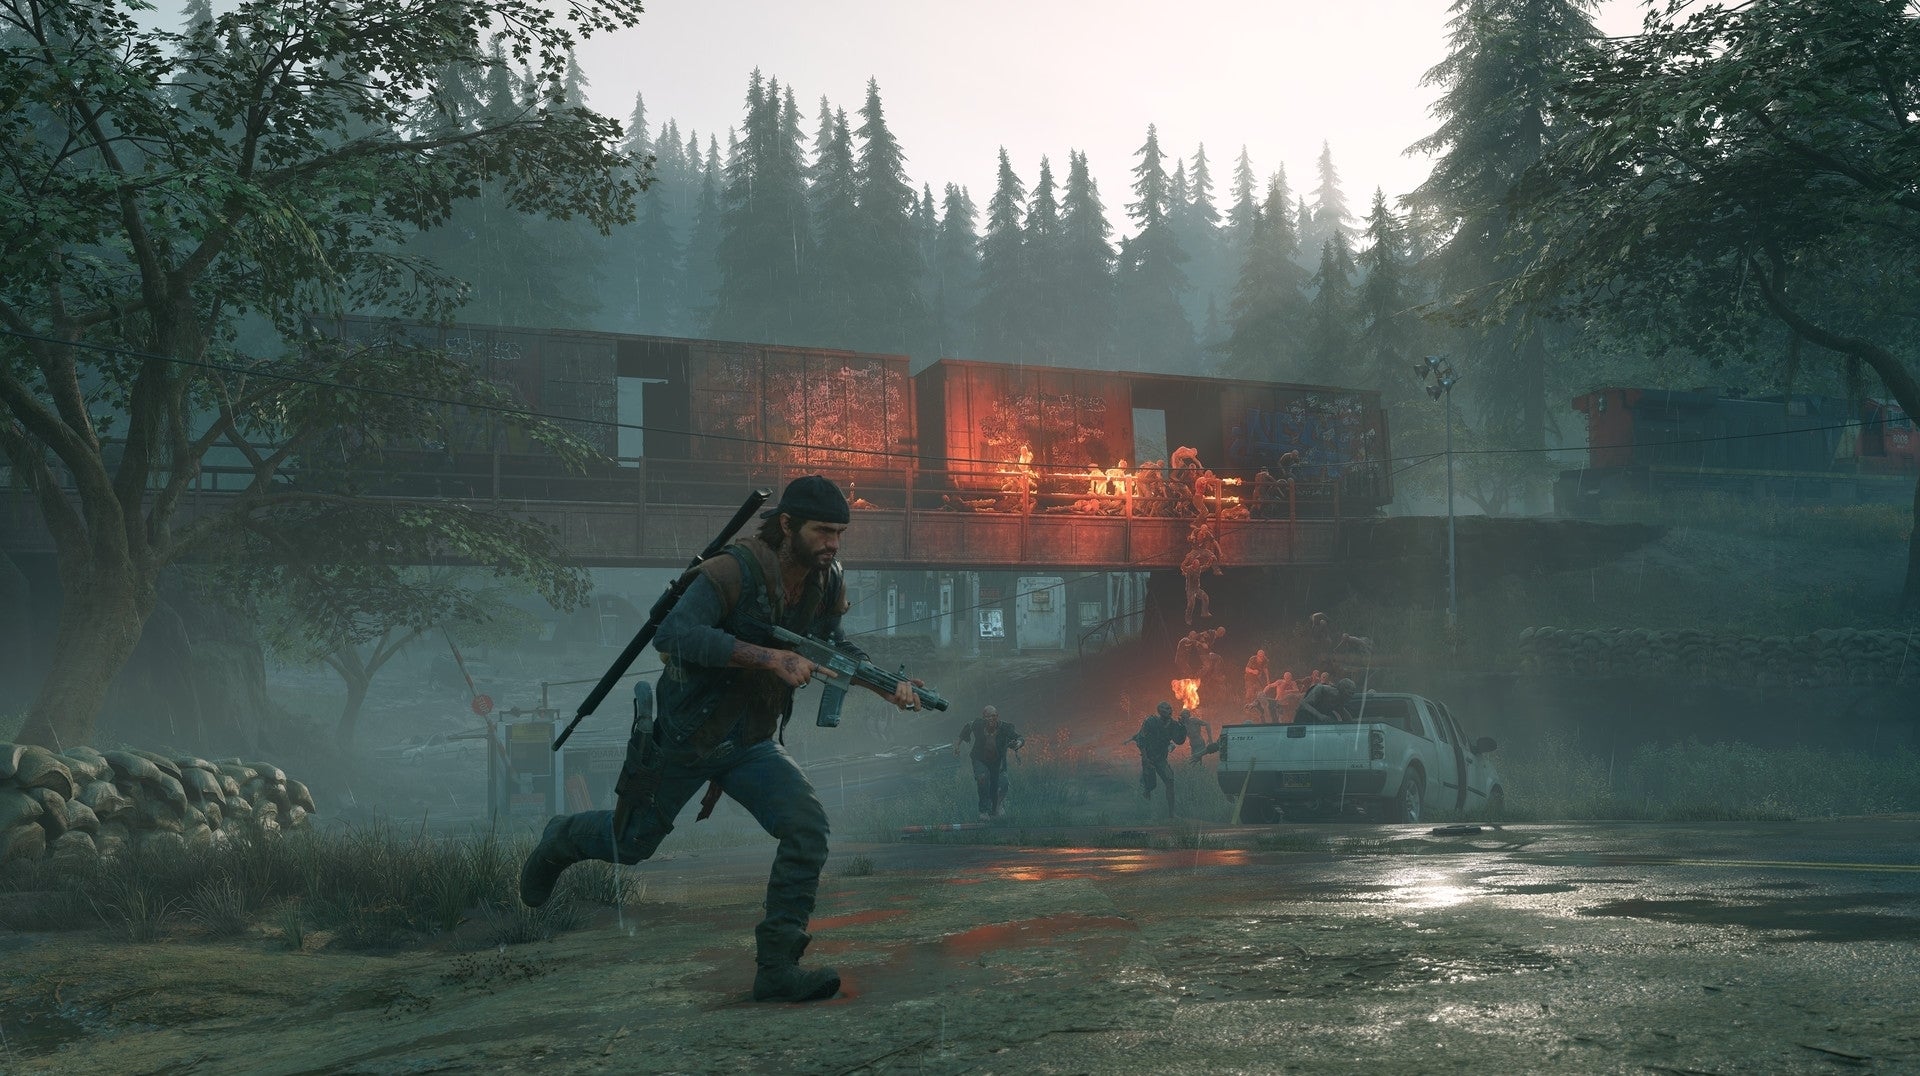 Image for Days Gone Steam page reveals system requirements, SSD recommended